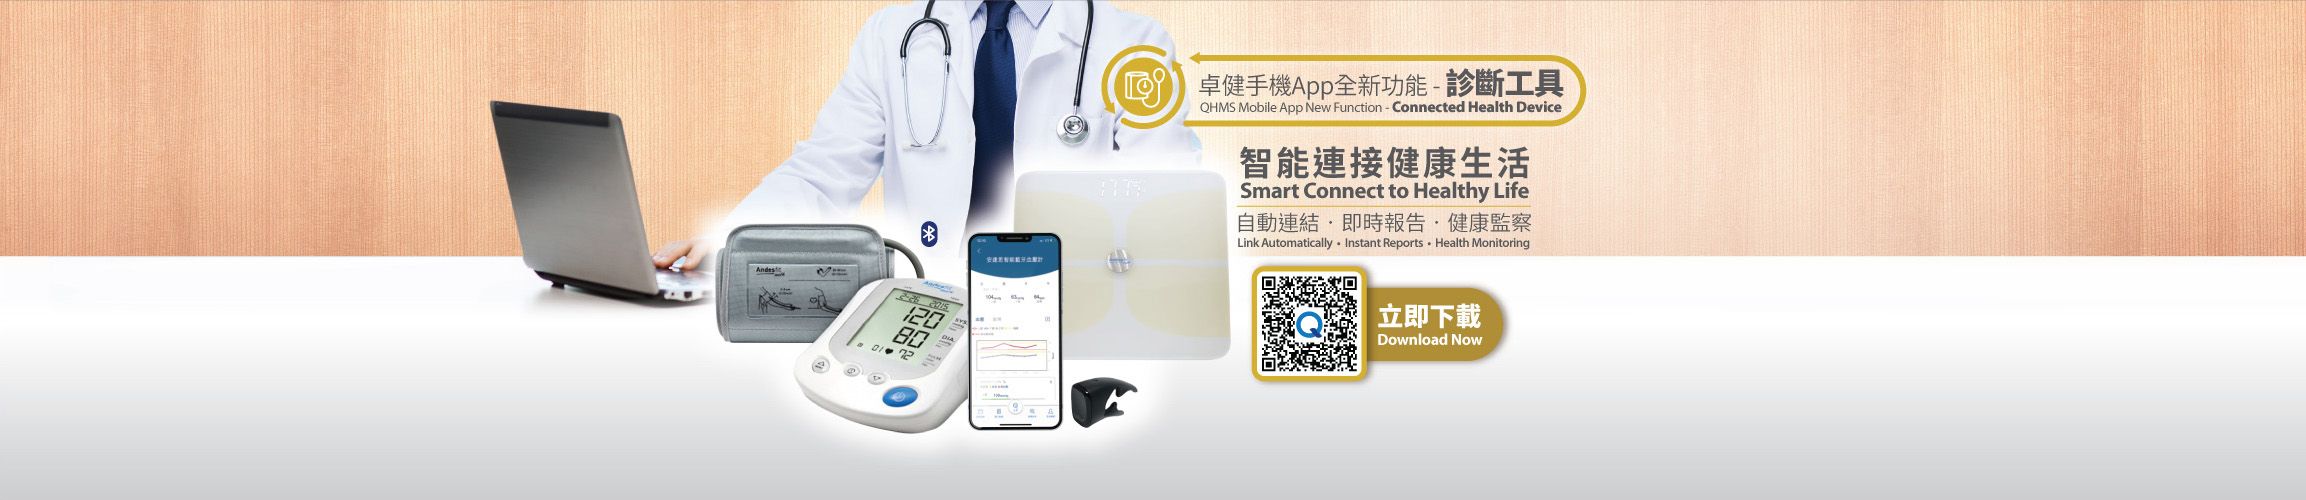 QHMS app connected health device banner